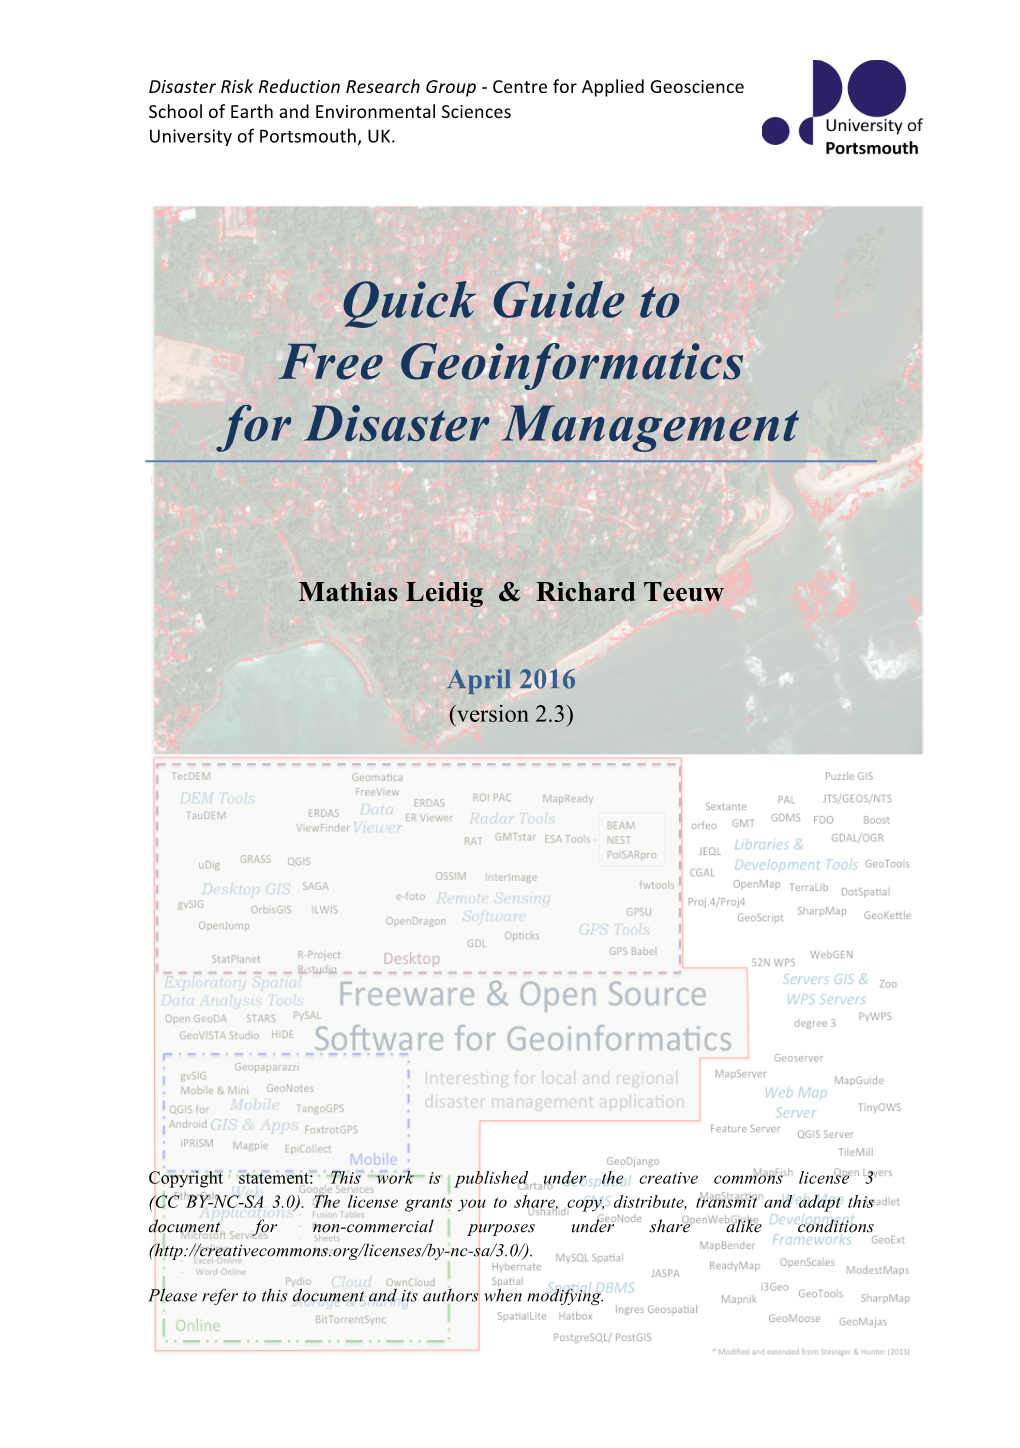 Quick Guide to Free Geoinformatics for Disaster Management